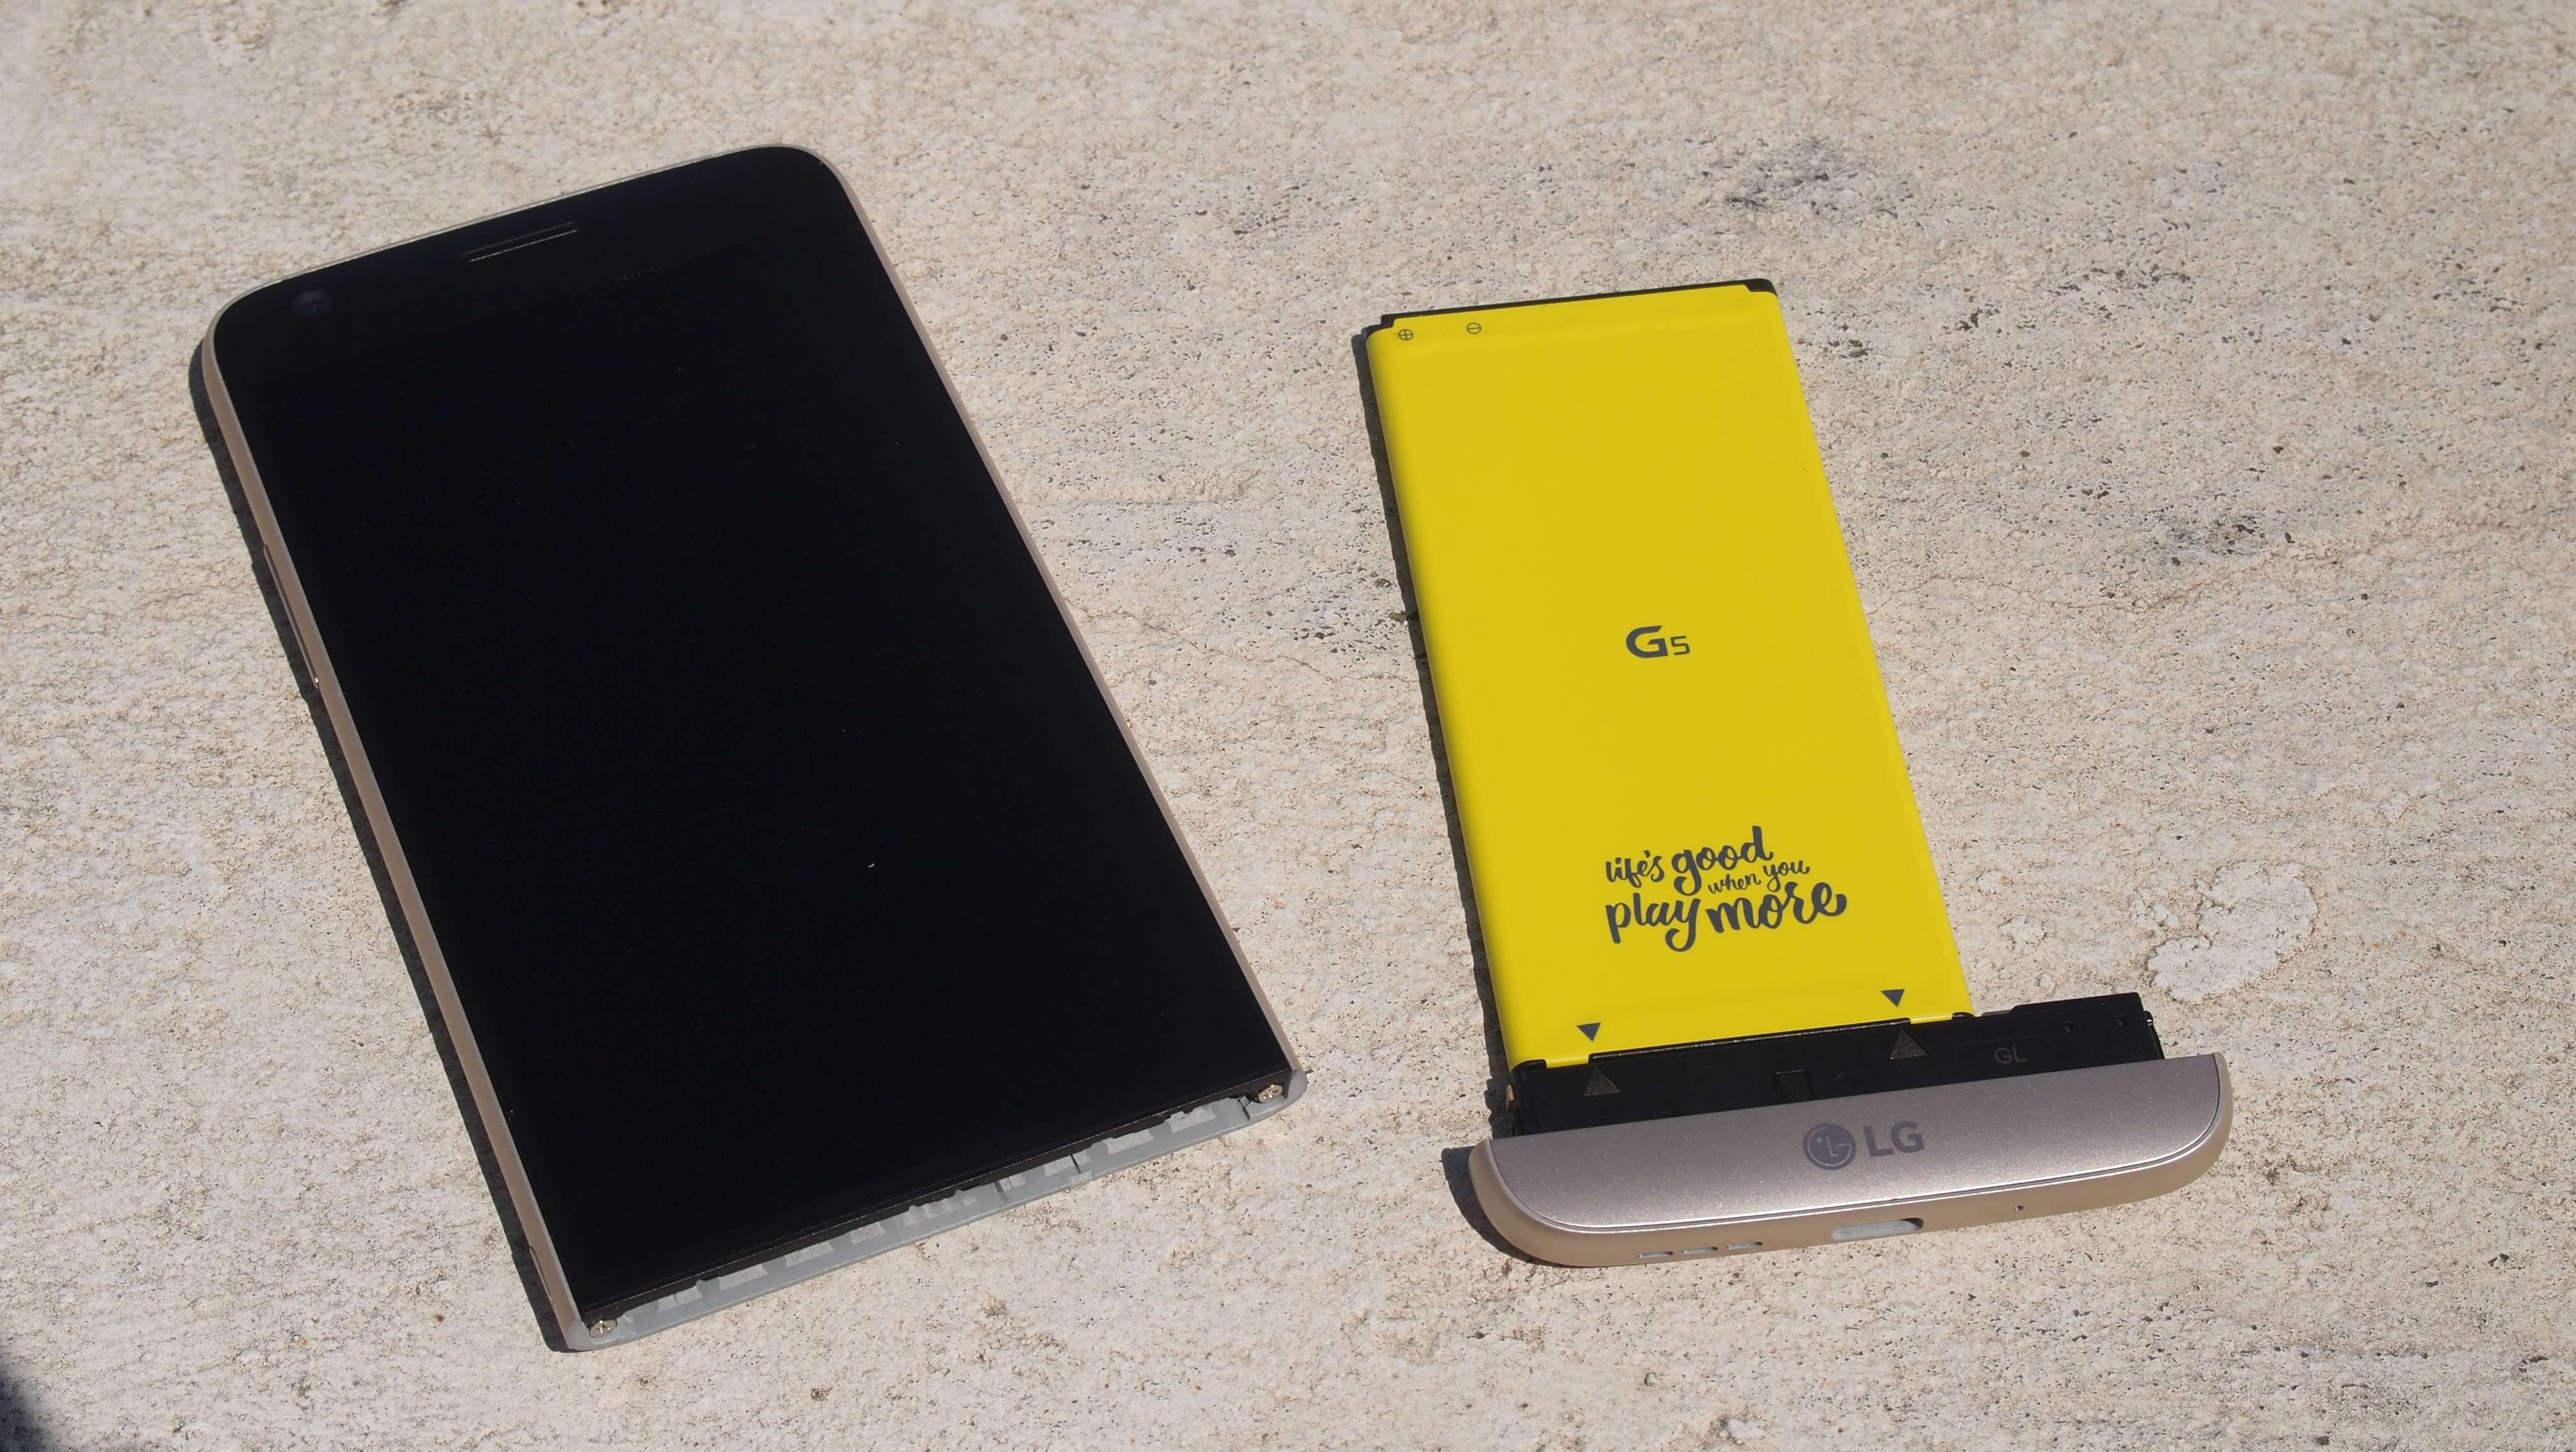 LG G5’s modularity allows users to pull out the bottom of the phone and plug in new hardware.